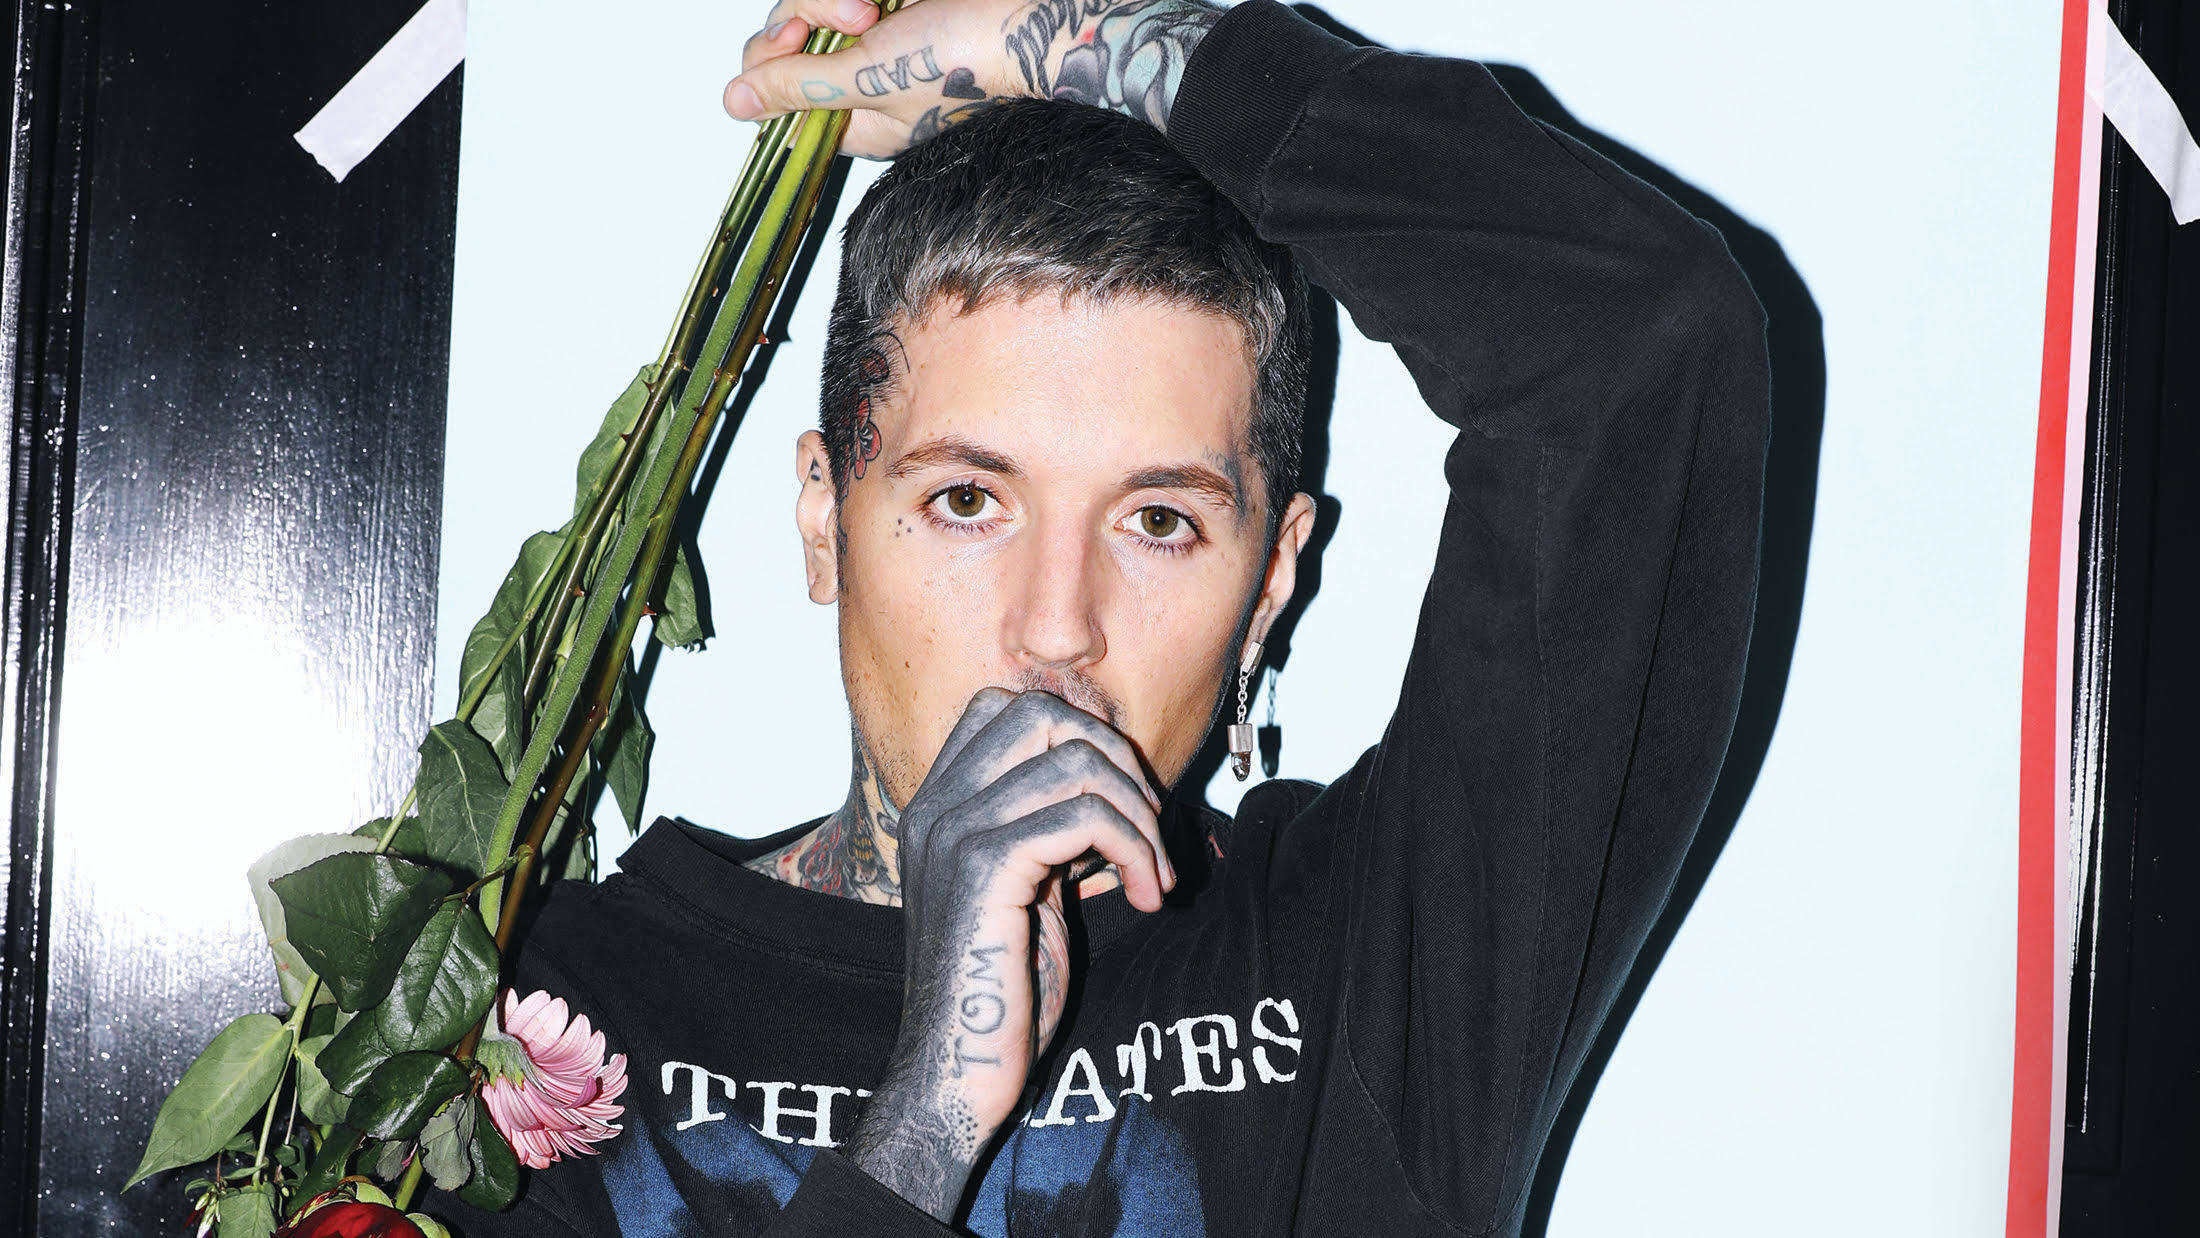 oliver sykes quotes about love